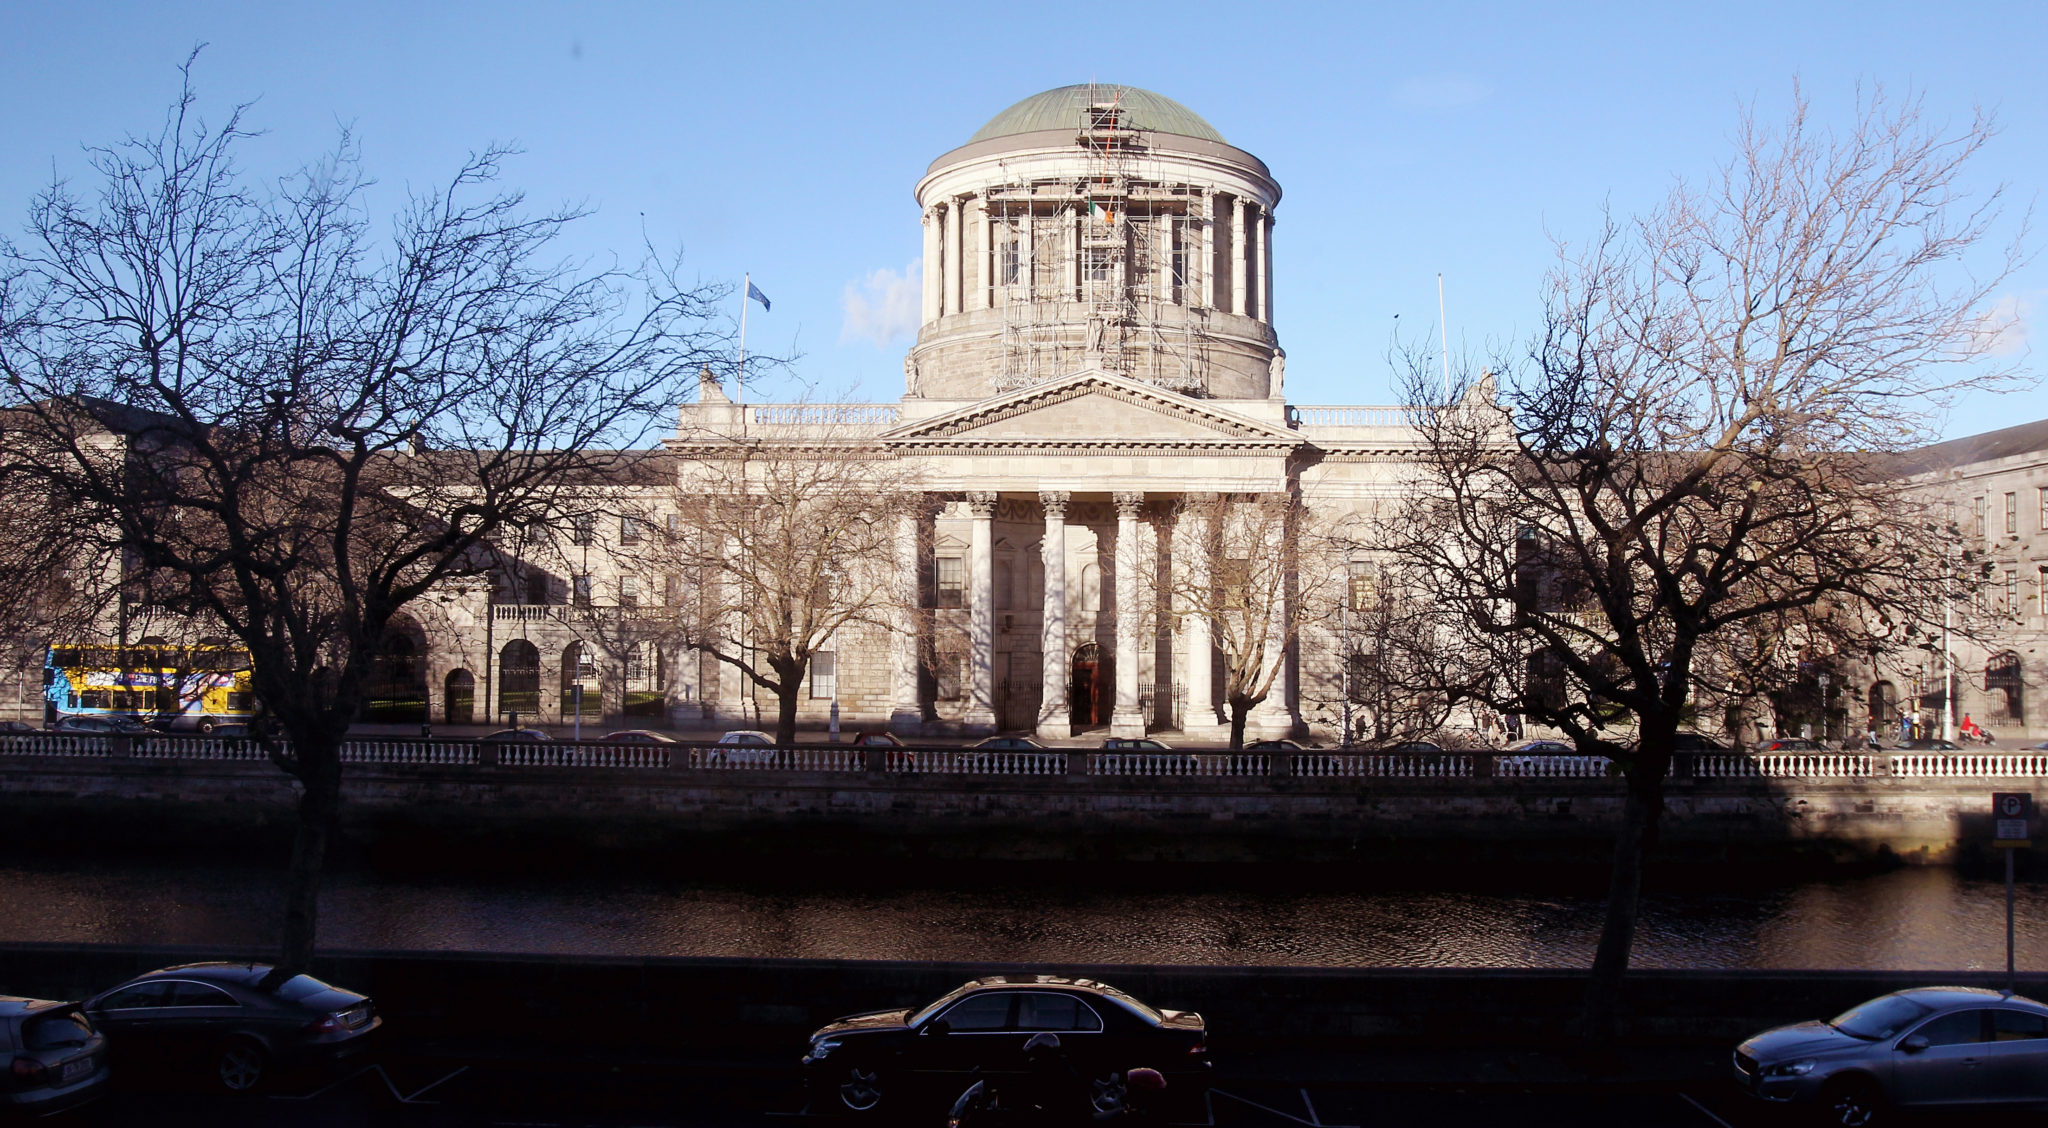 The Four Courts in Dublin